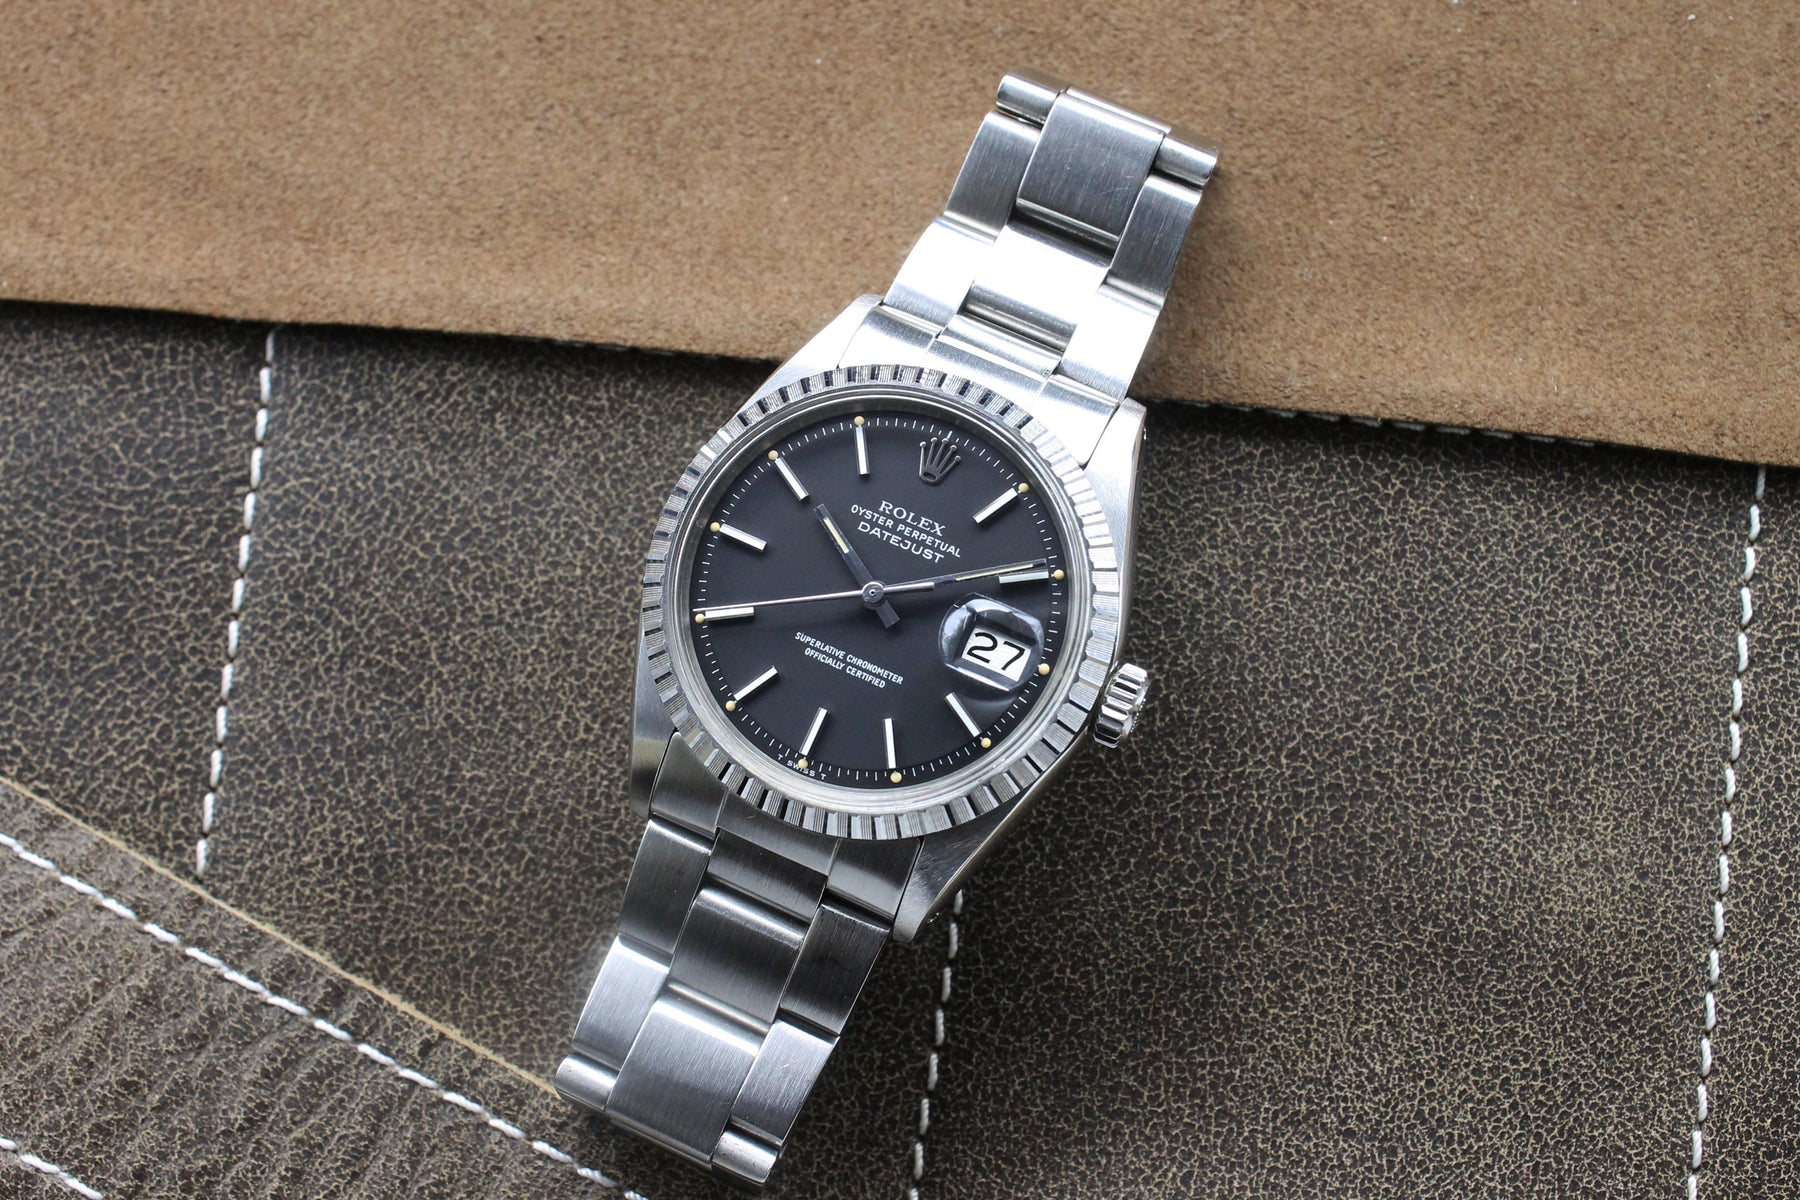 1977 Rolex Datejust 'Mint condition' Ref. 1603 (with Papers)